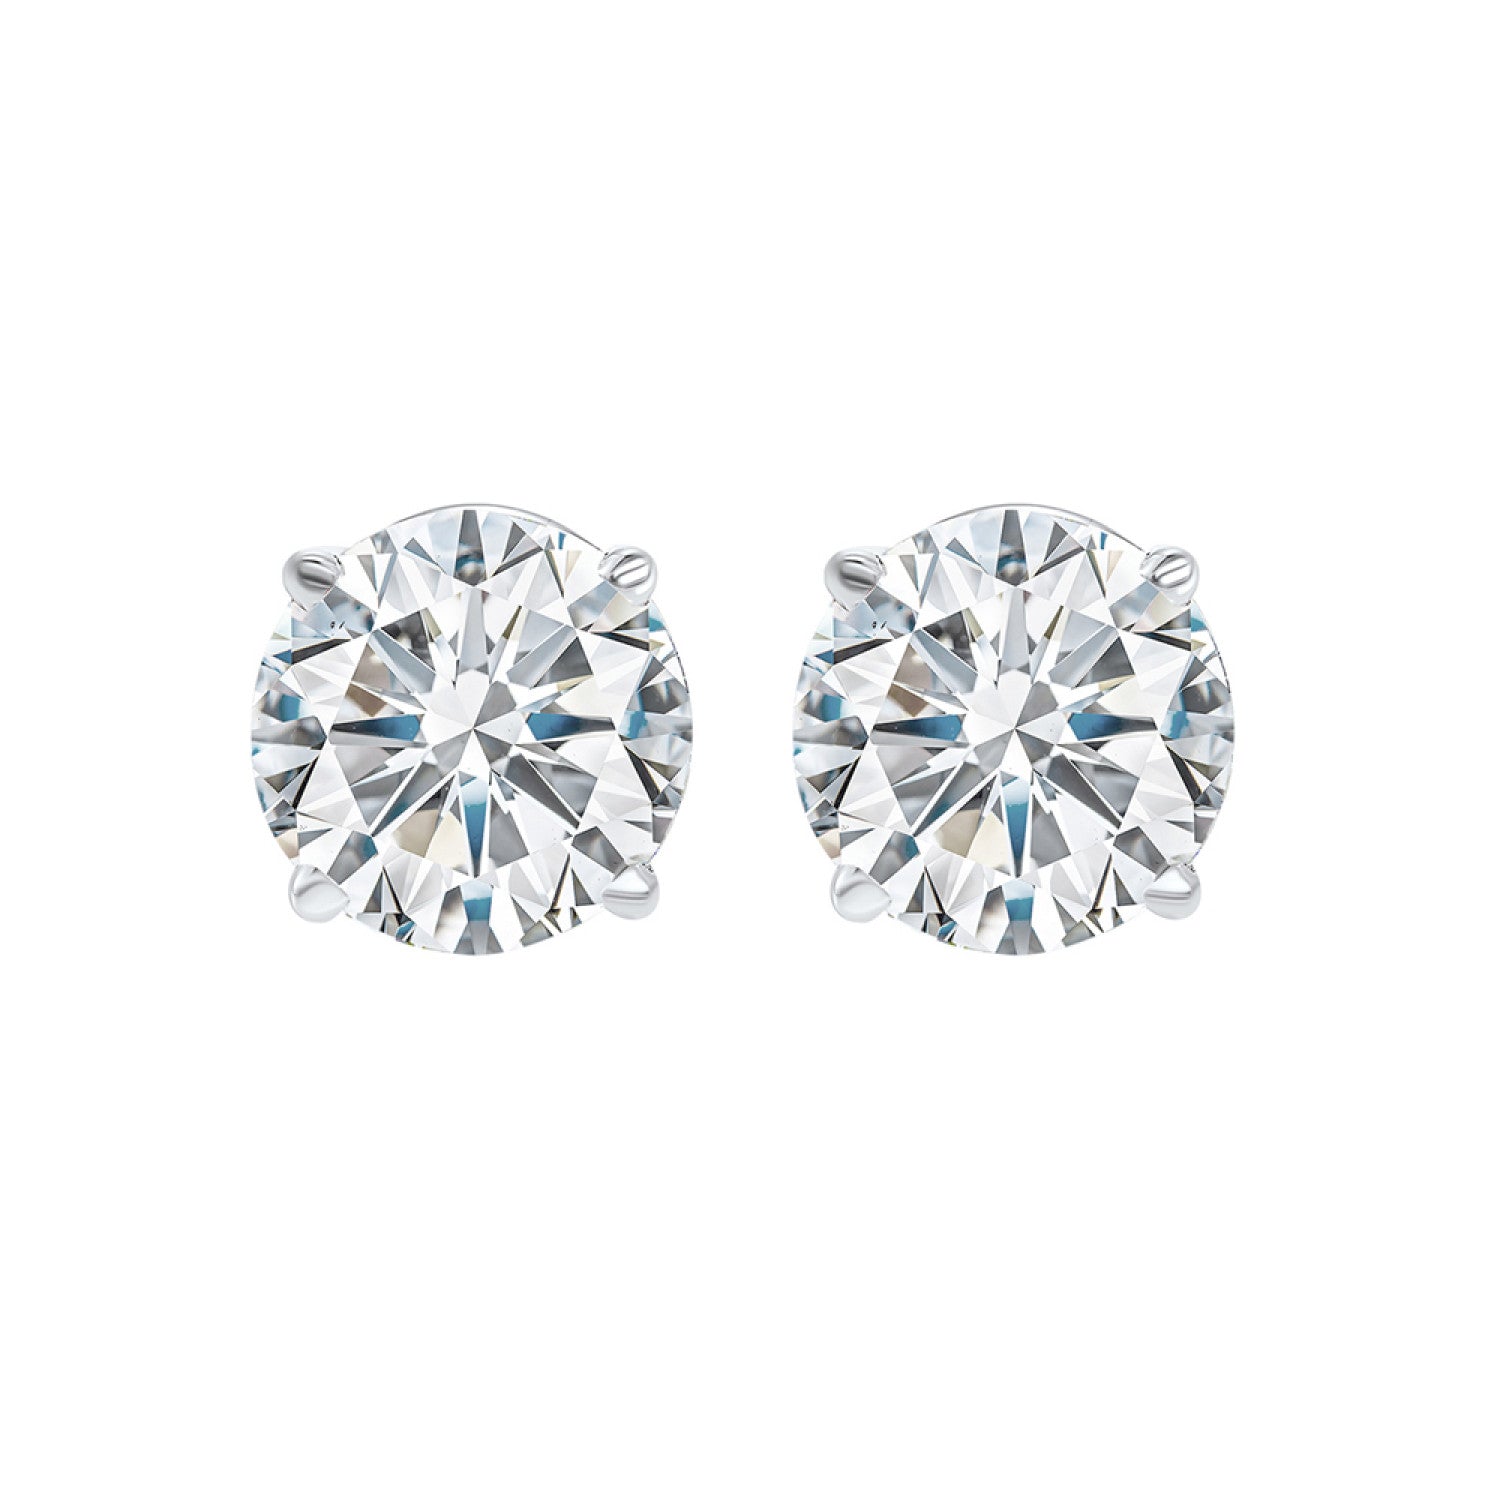 1ct tcw Four Prong Round Diamond Stud Earring in 14KW